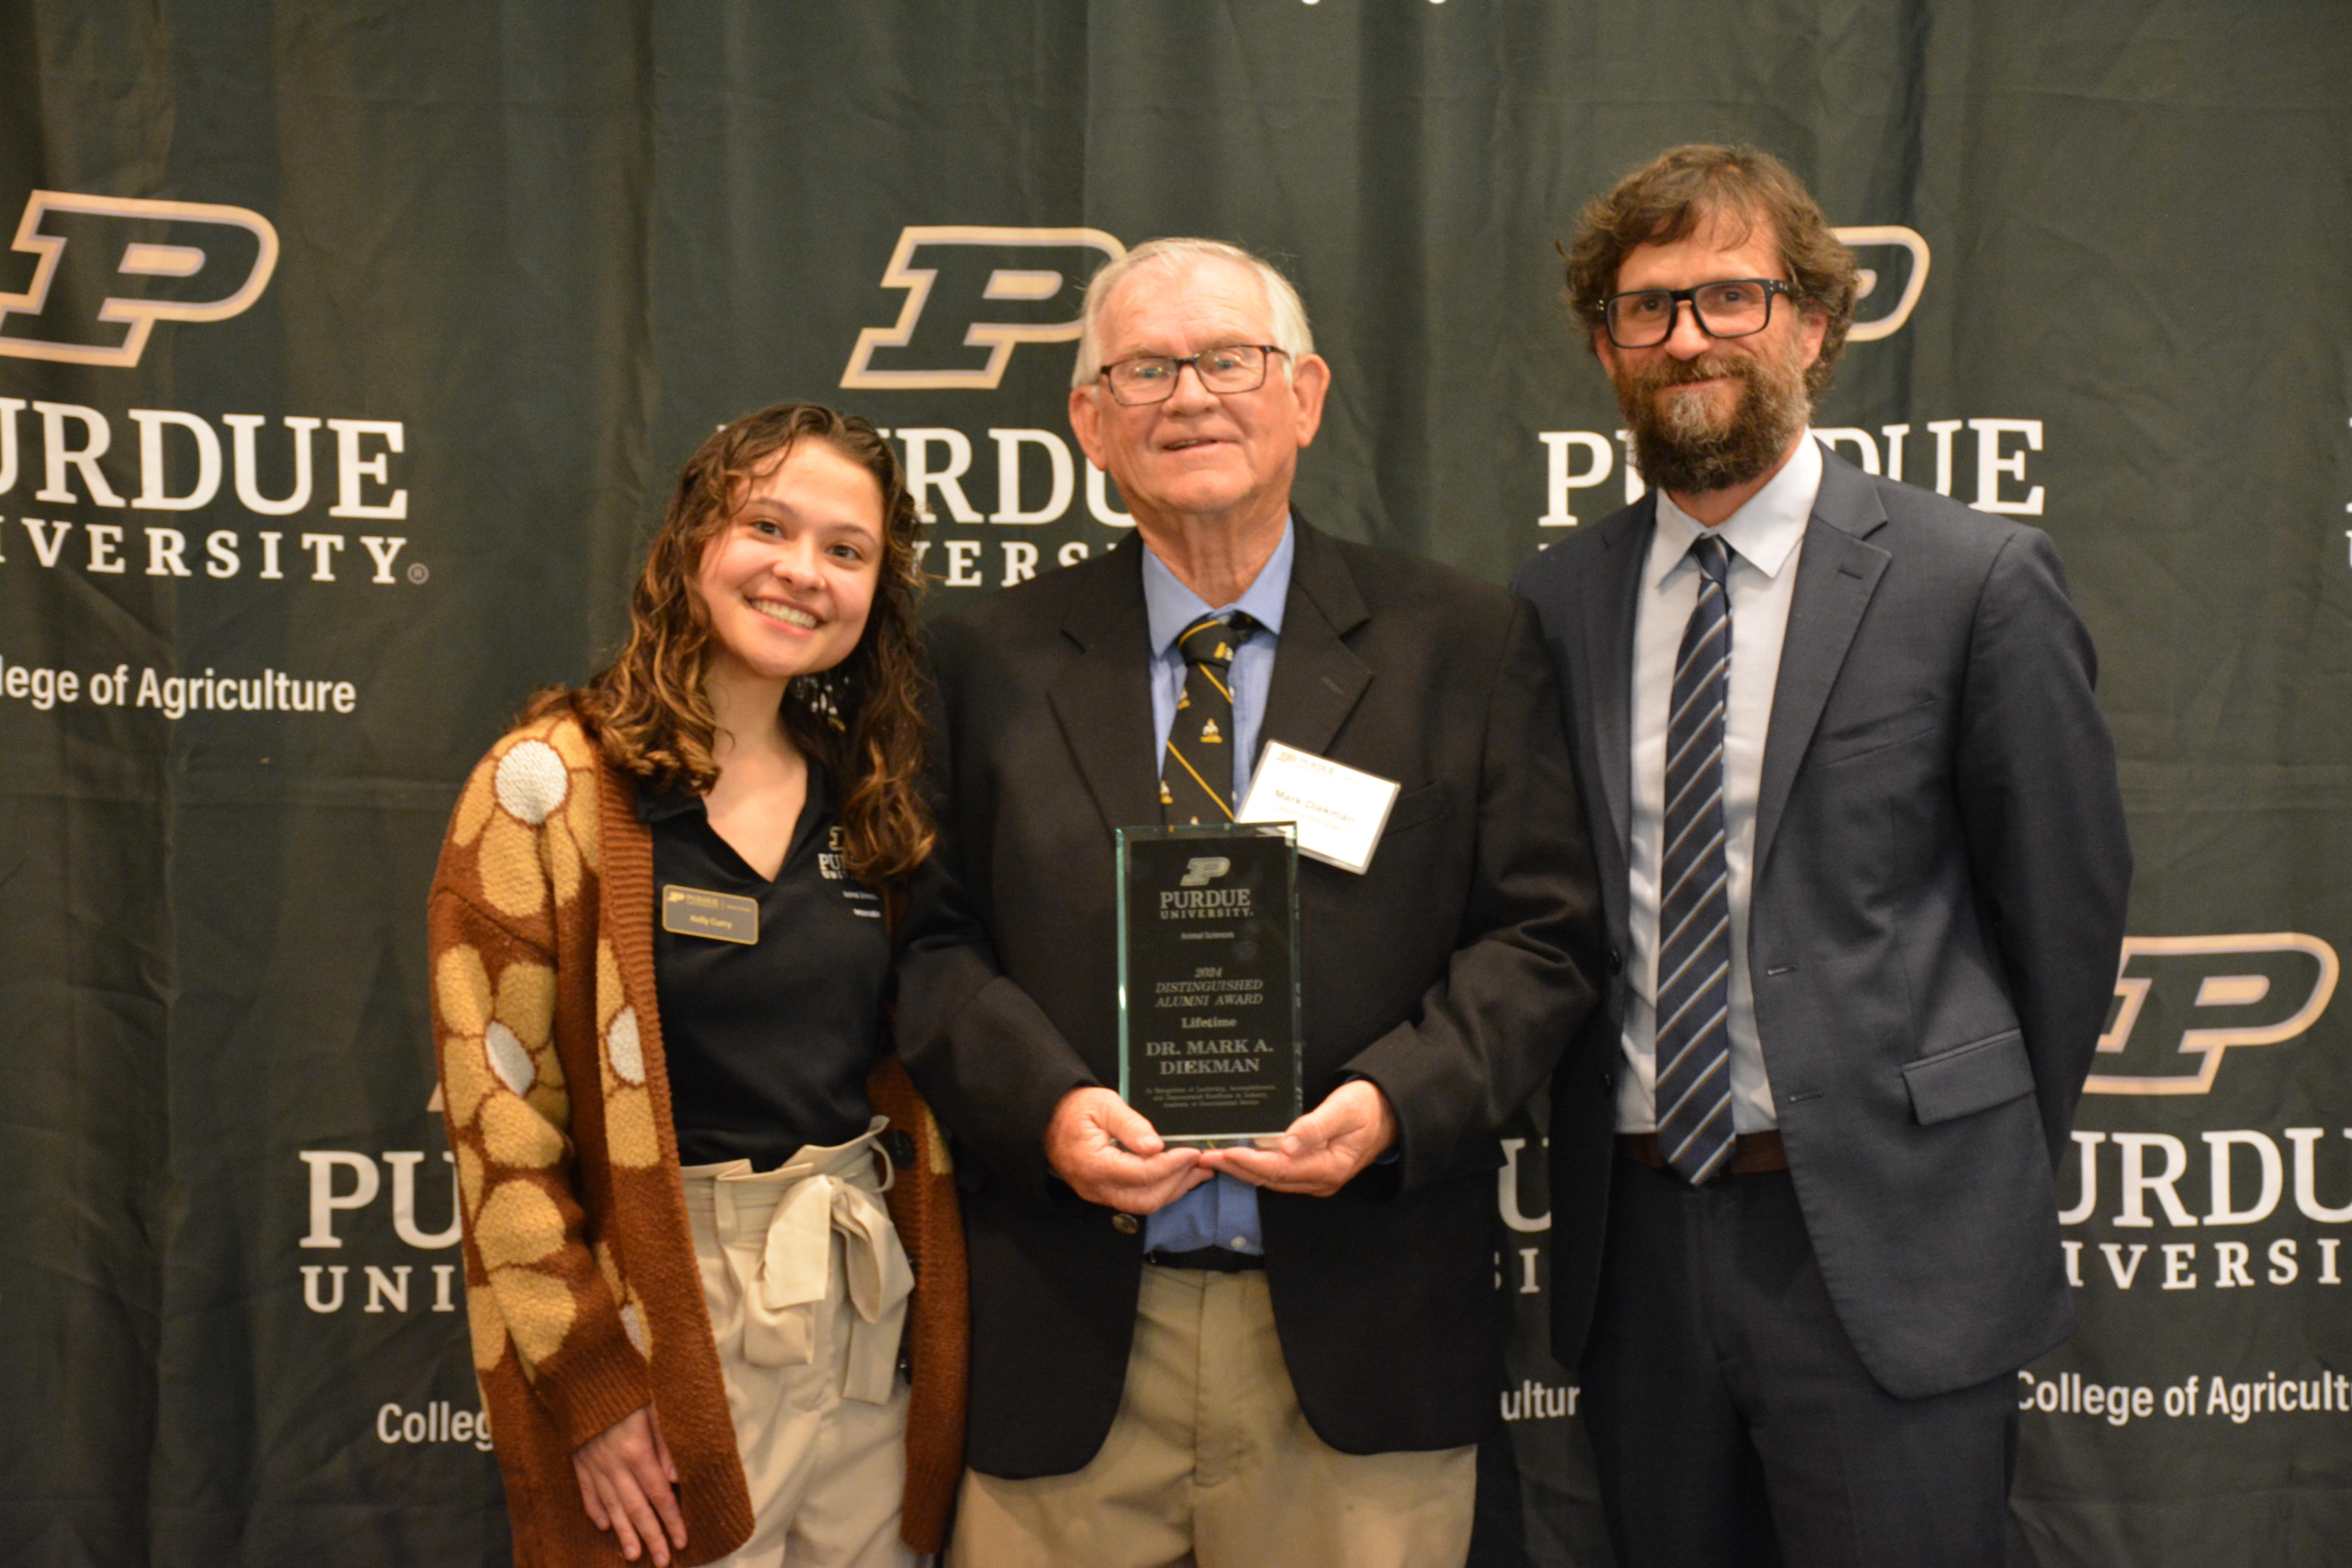 Dr. Mark Diekman accepting award. Dr. Paul Ebner and Kelly Curry stand next to him.